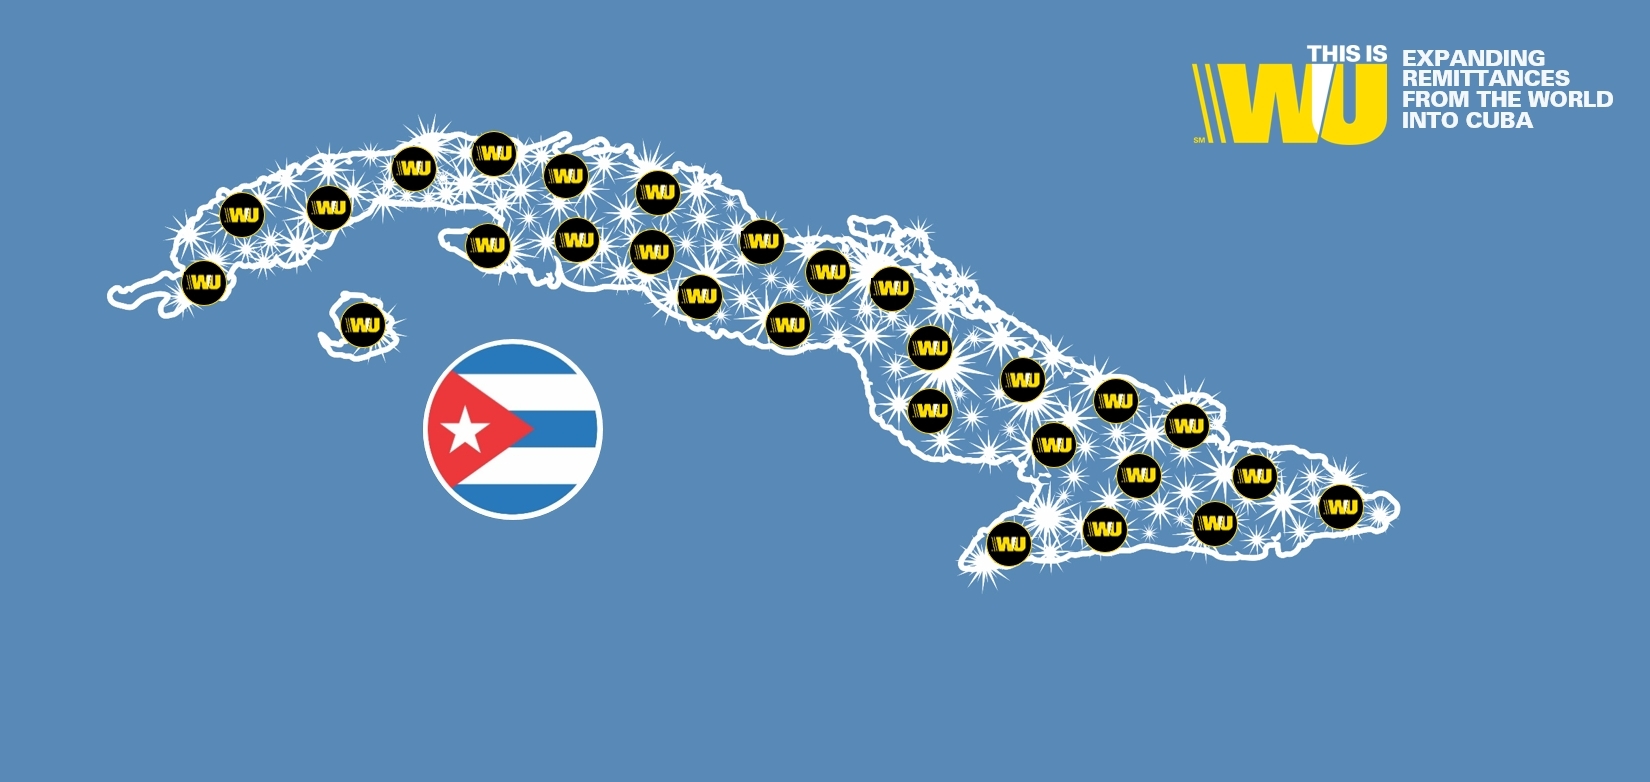 Vector Illustration showing Western Unions on a Cuba map